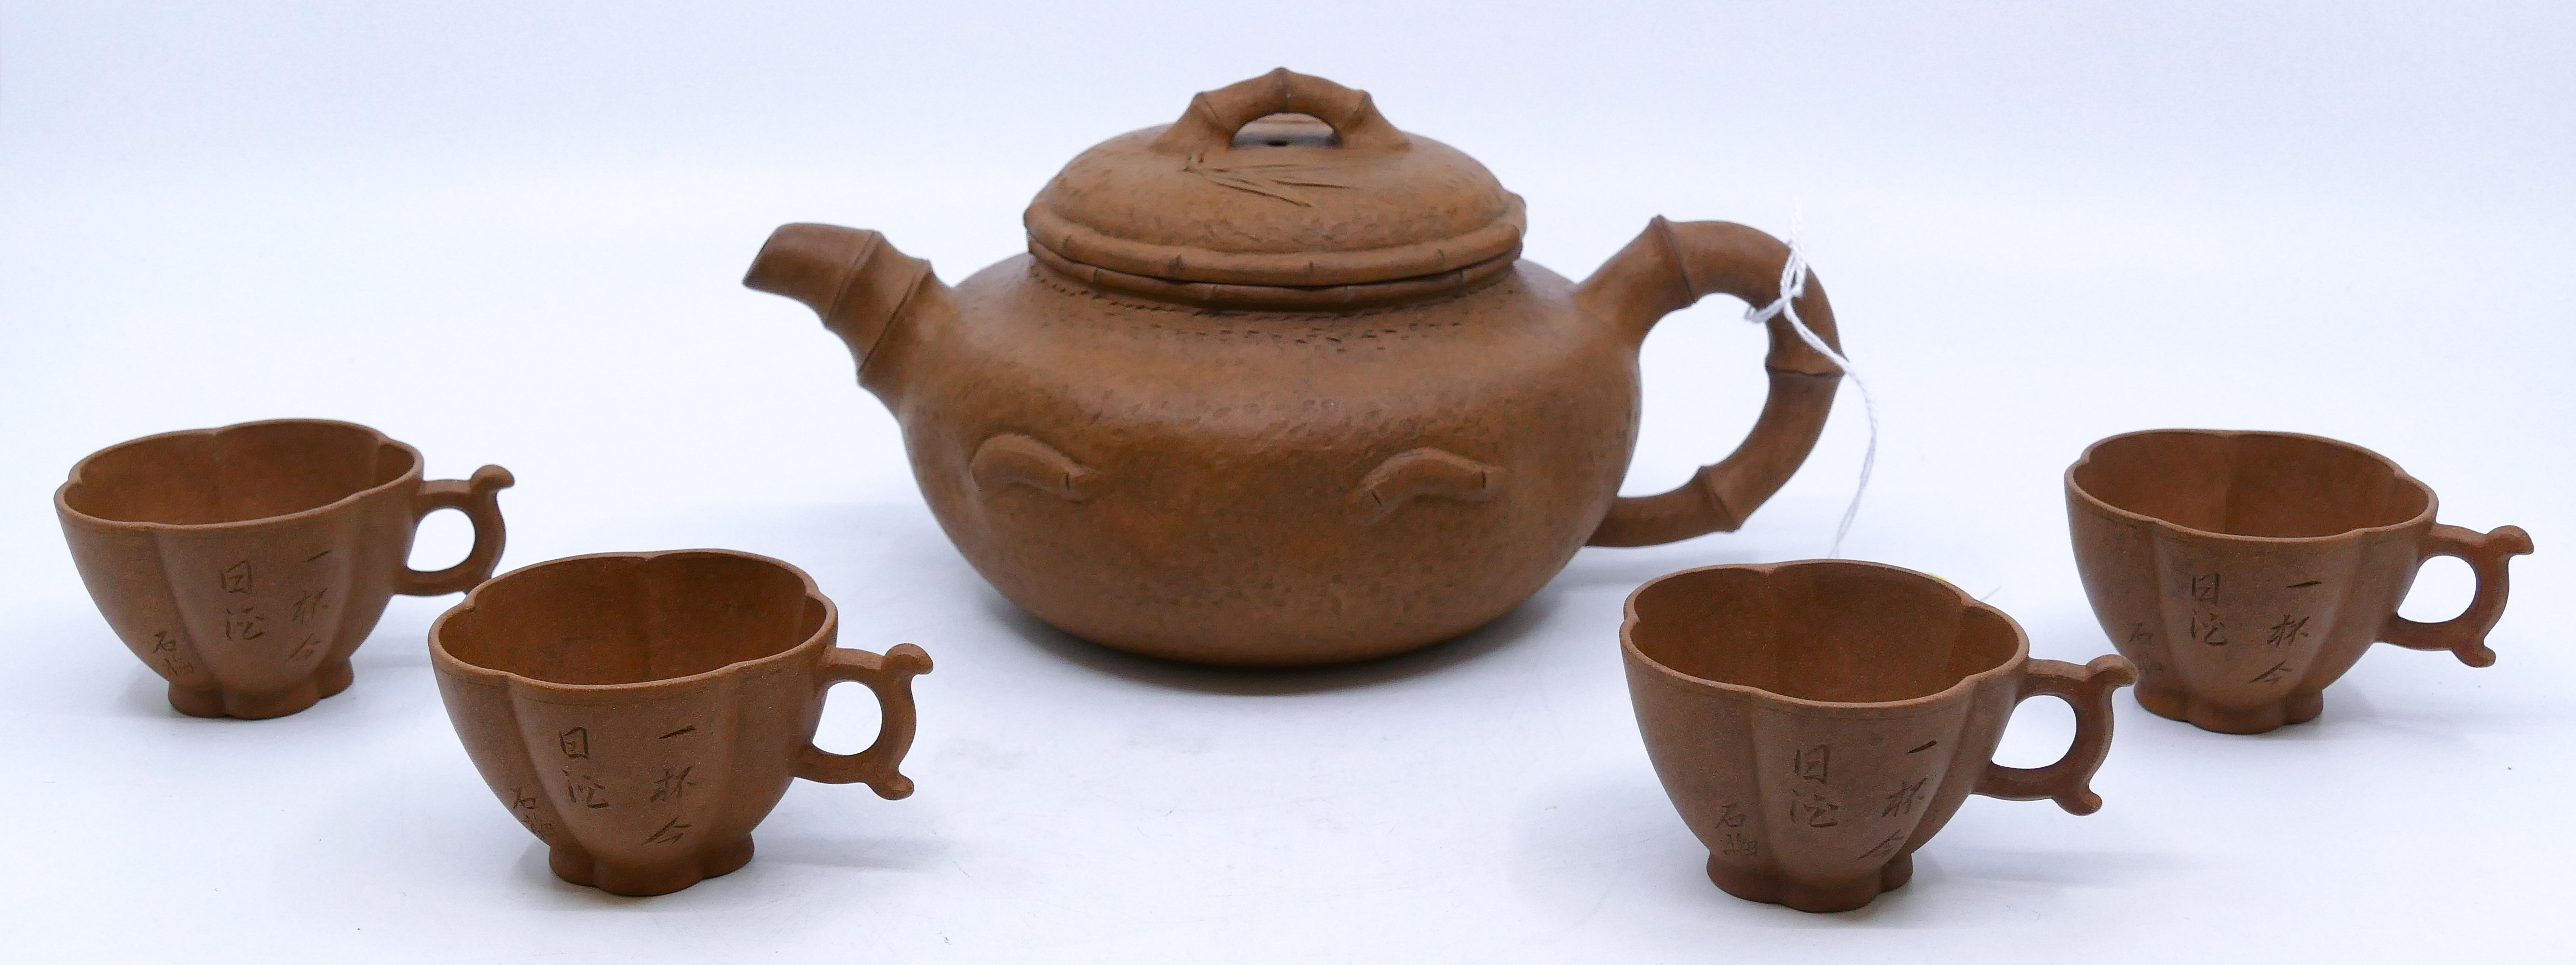 5pc Chinese Yixing Teapot and Cup 3afddd